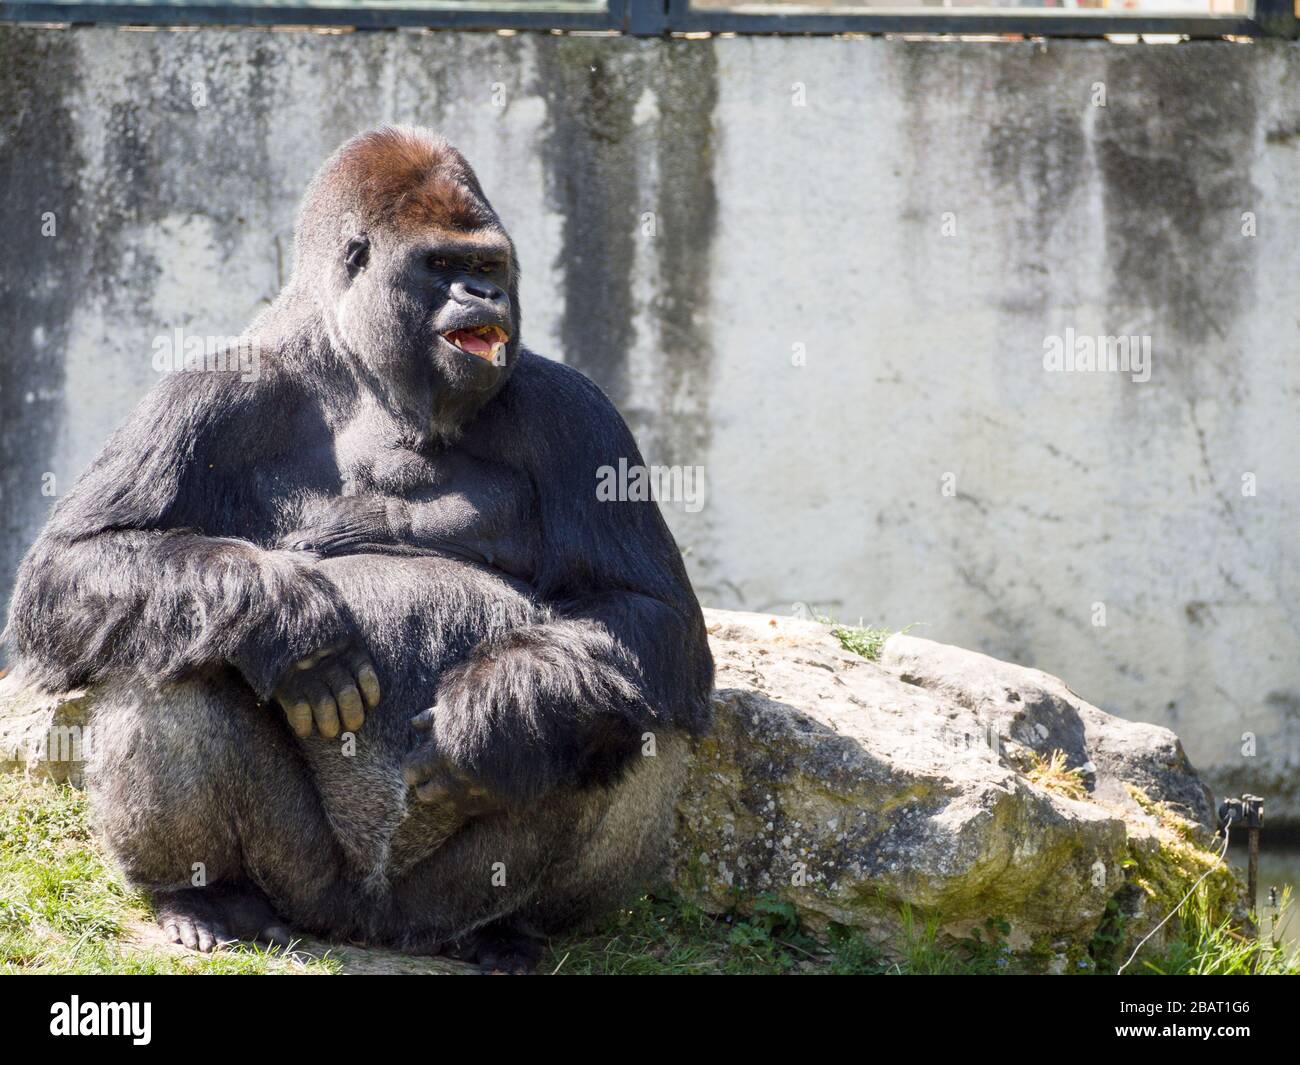 Laughing  Mountain Gorillia: A large male mountain gorilla seems to laugh showing his teeth as he waits for food to be tossed his way. Stock Photo